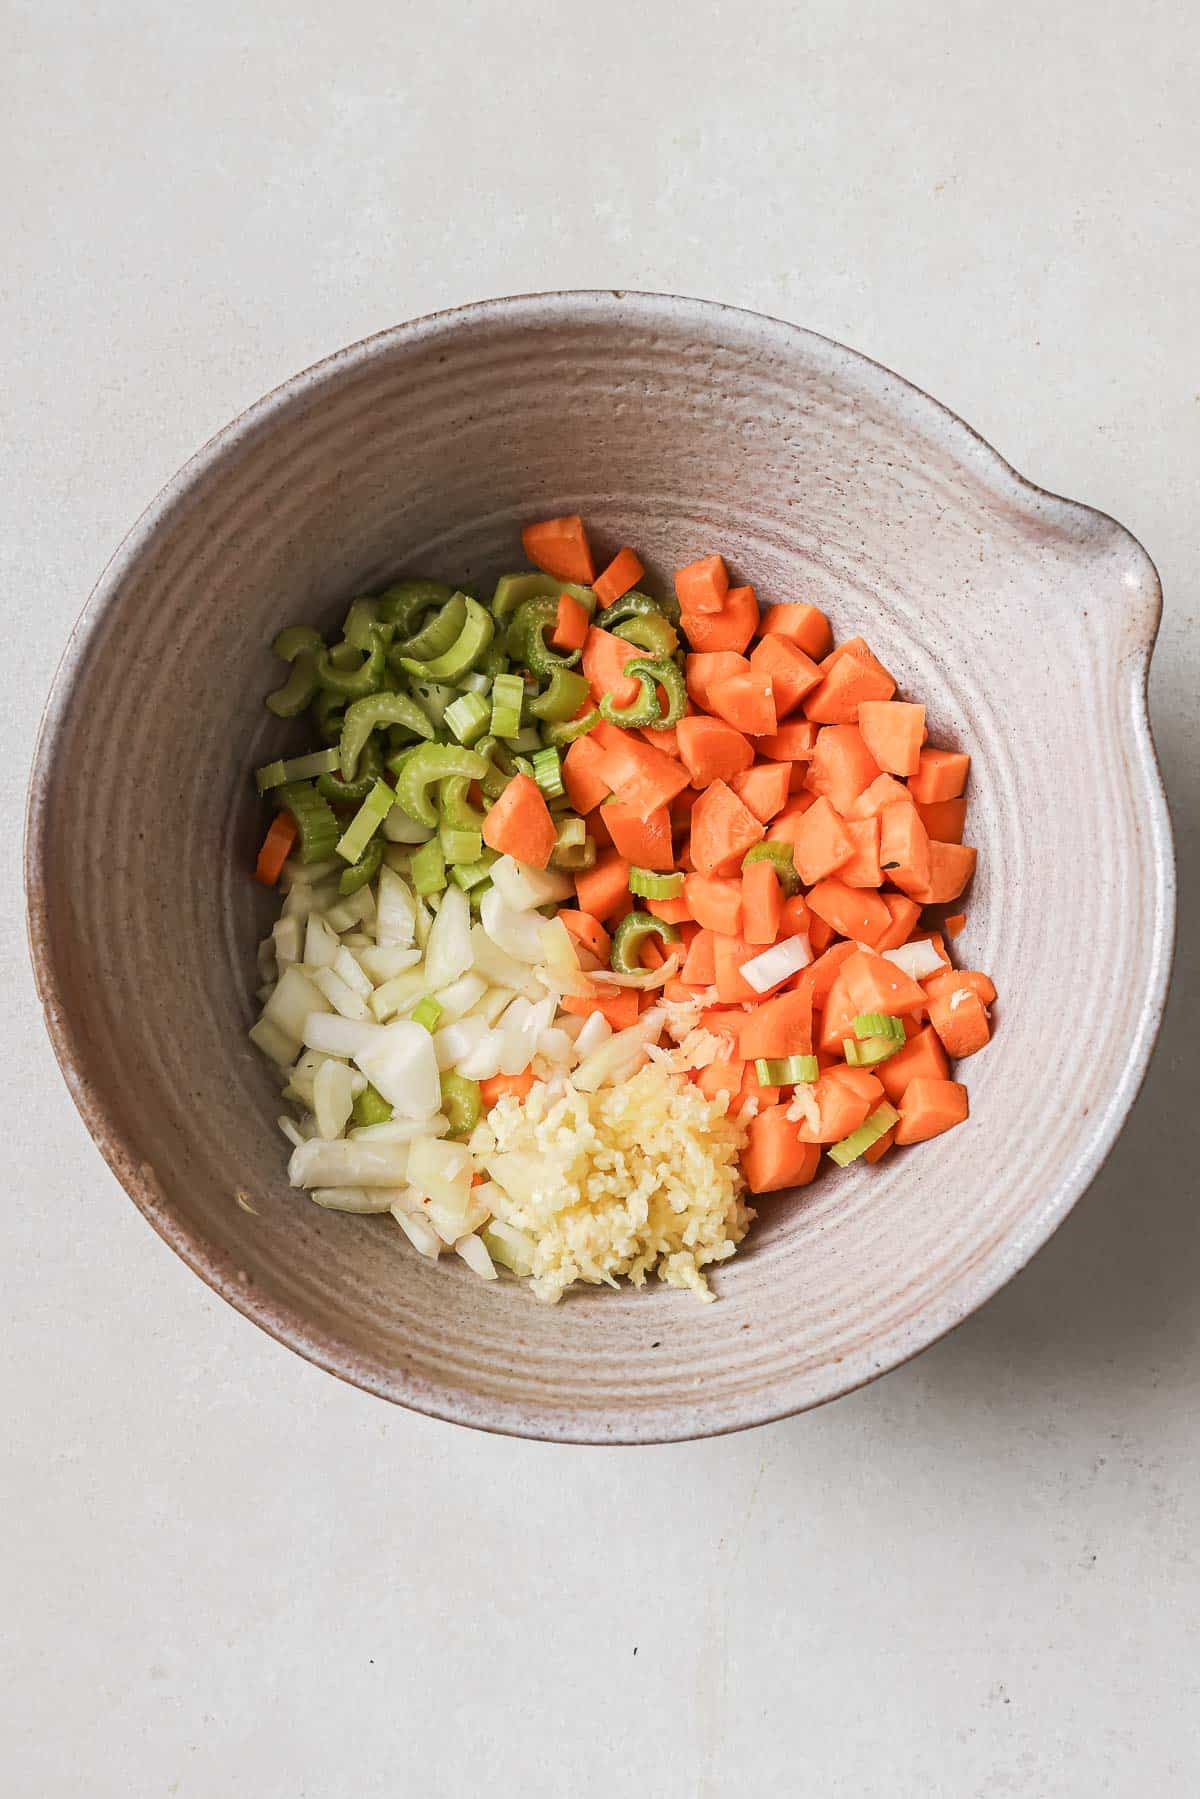 Chopped carrots, celery, onions, and garlic in a bowl, ingredients prepared for cooking.